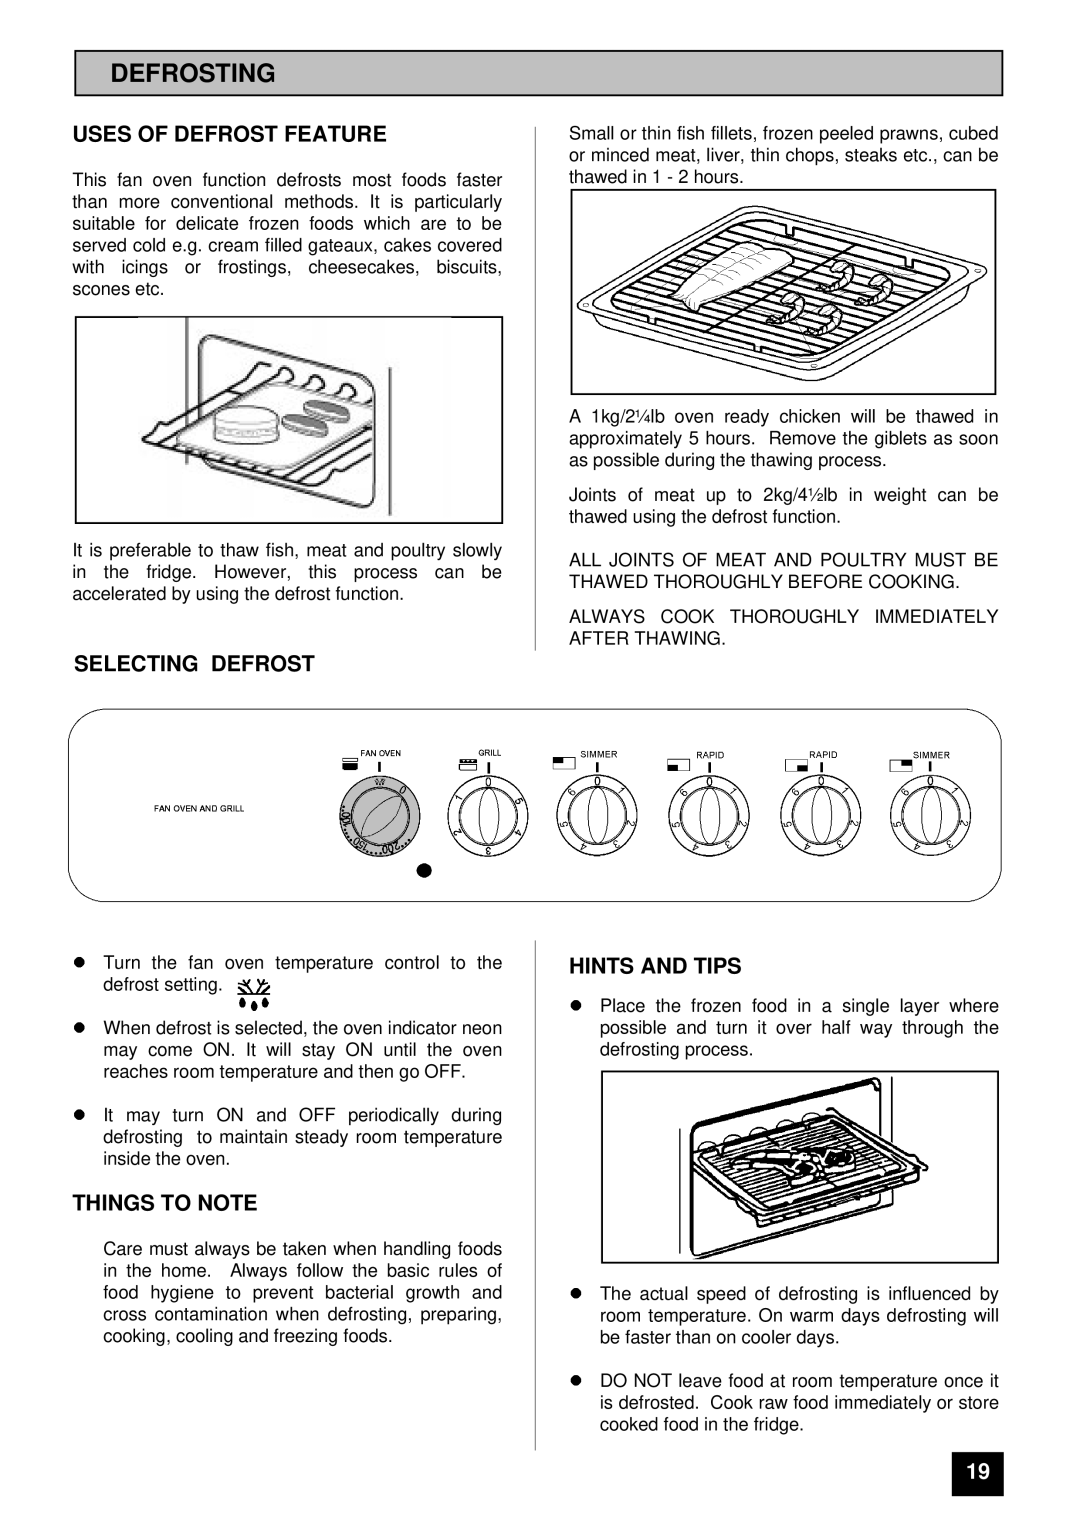 Tricity Bendix CSIE316 installation instructions Defrosting, Uses of Defrost Feature, Selecting Defrost 